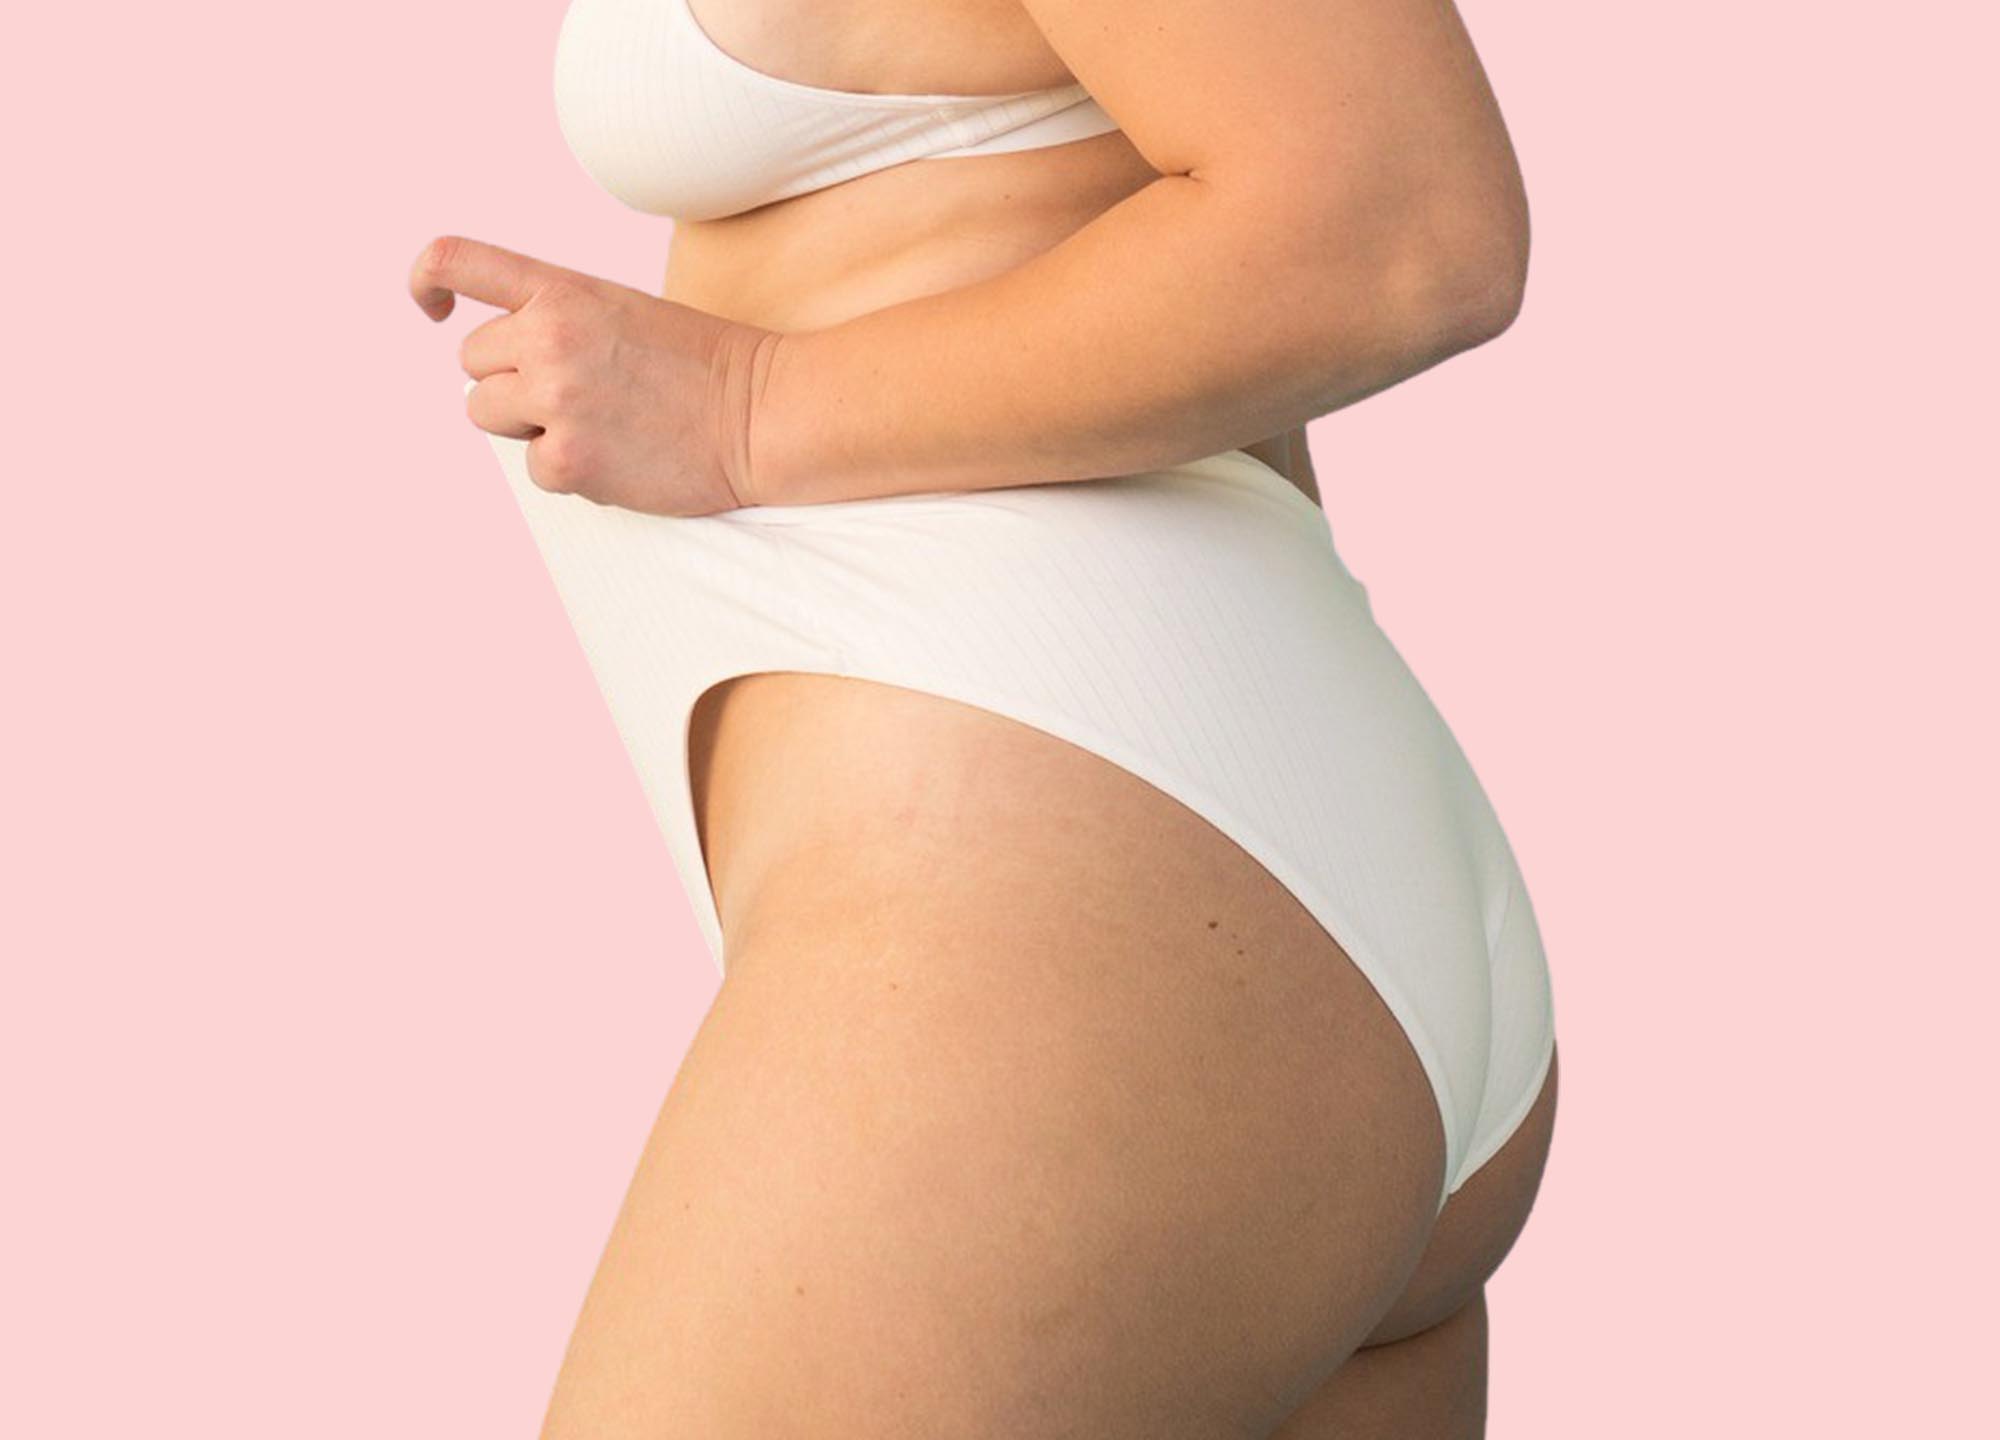 We broke down everything you need to know about six of the most popular in-office cellulite treatments.